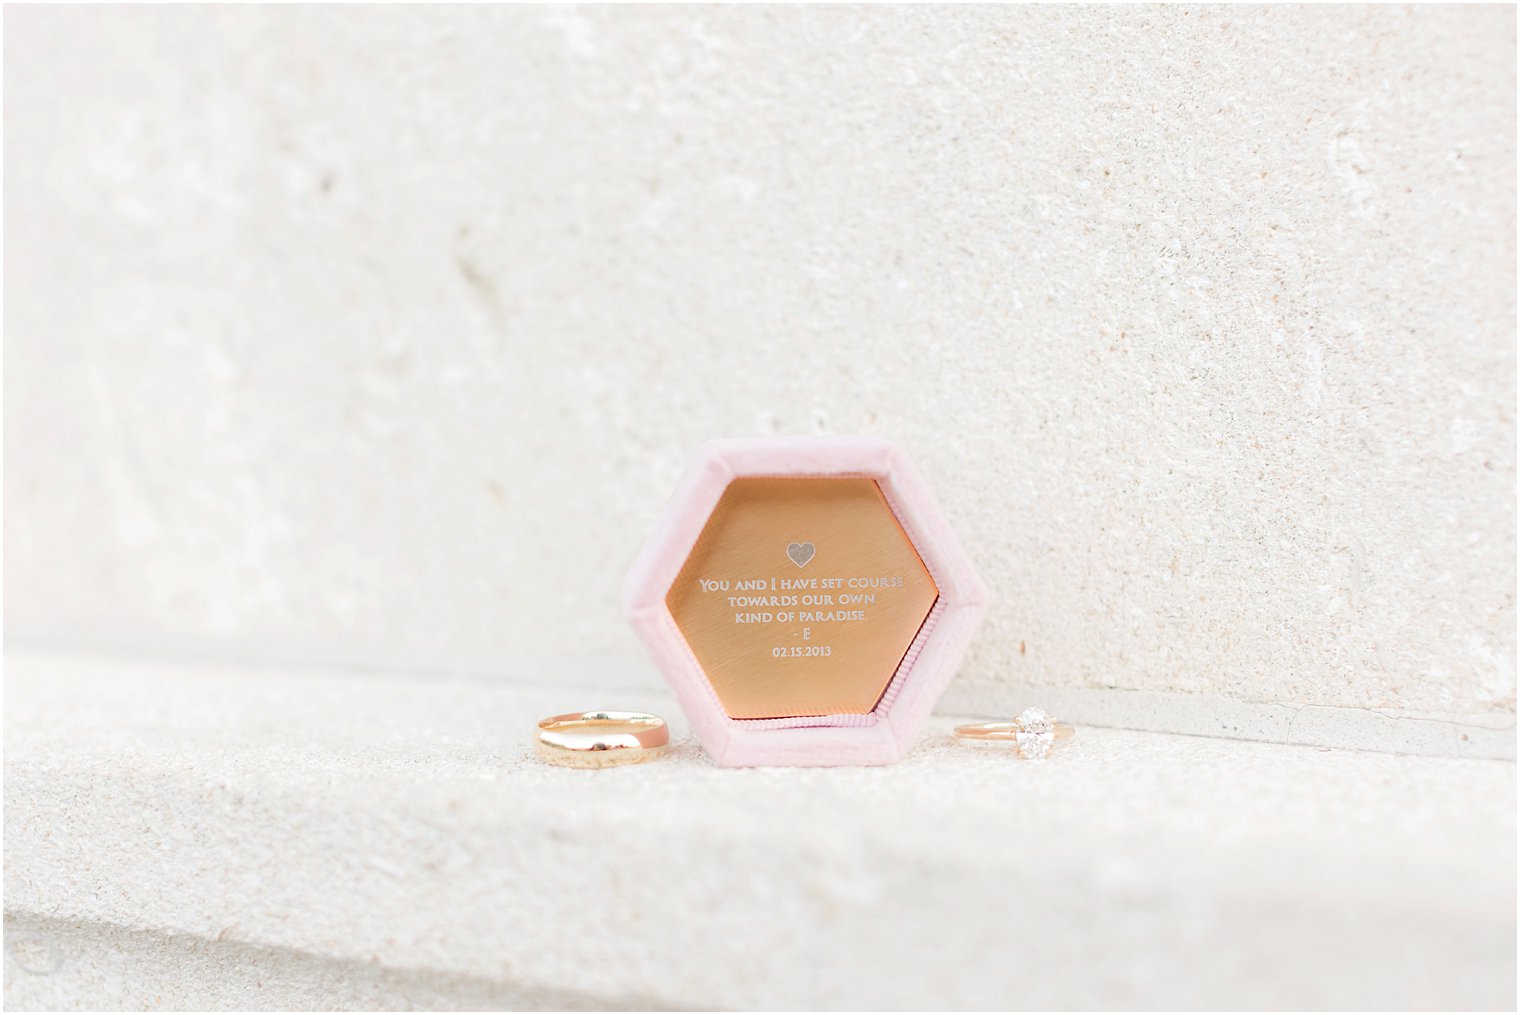 engagement ring lays next to custom box with inscription 